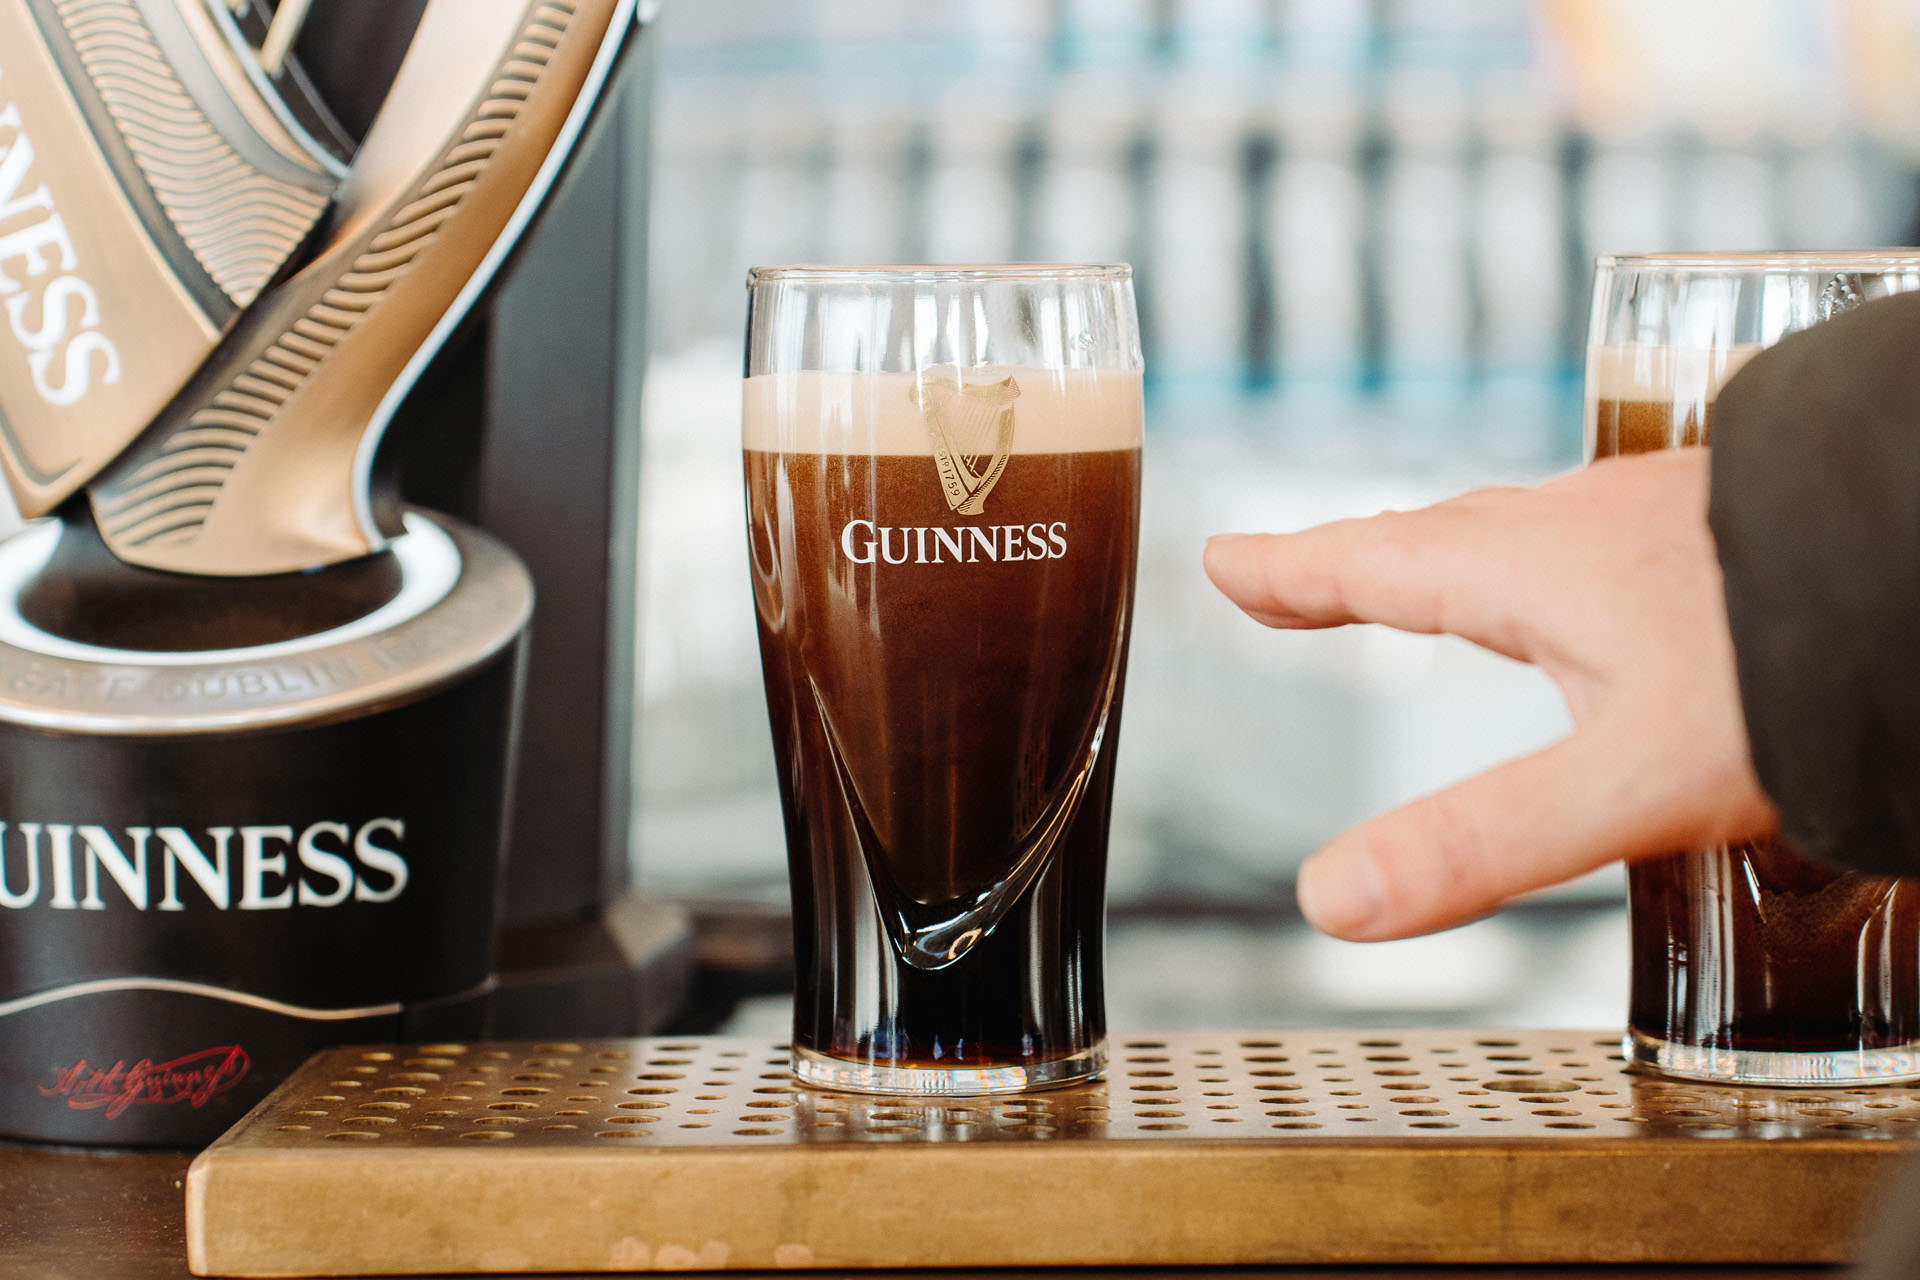 A Guinness Beer